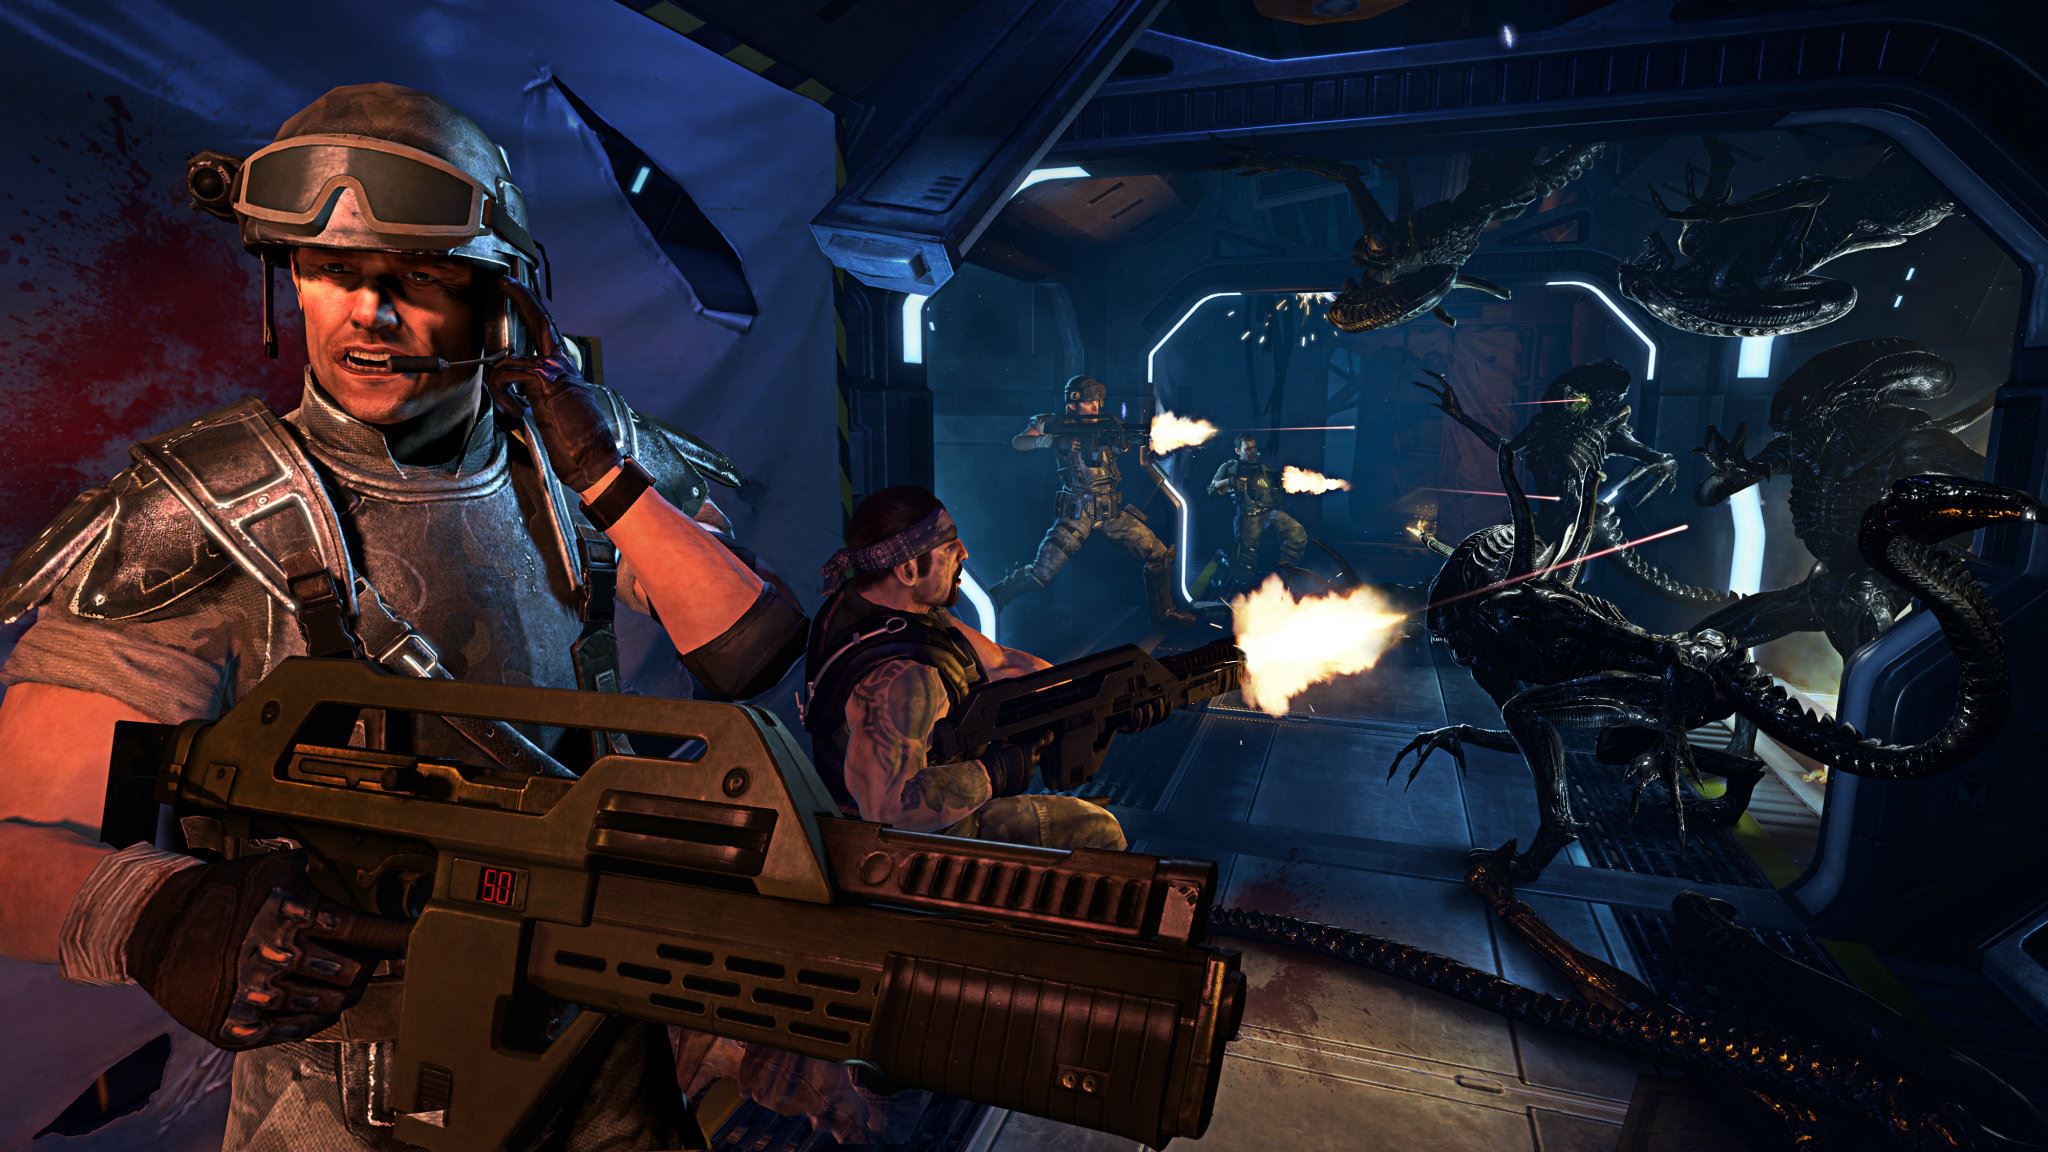 Aliens actor Michael Biehn says Gearbox's 'Aliens Colonial Marines' video game was a 'passionless' project.